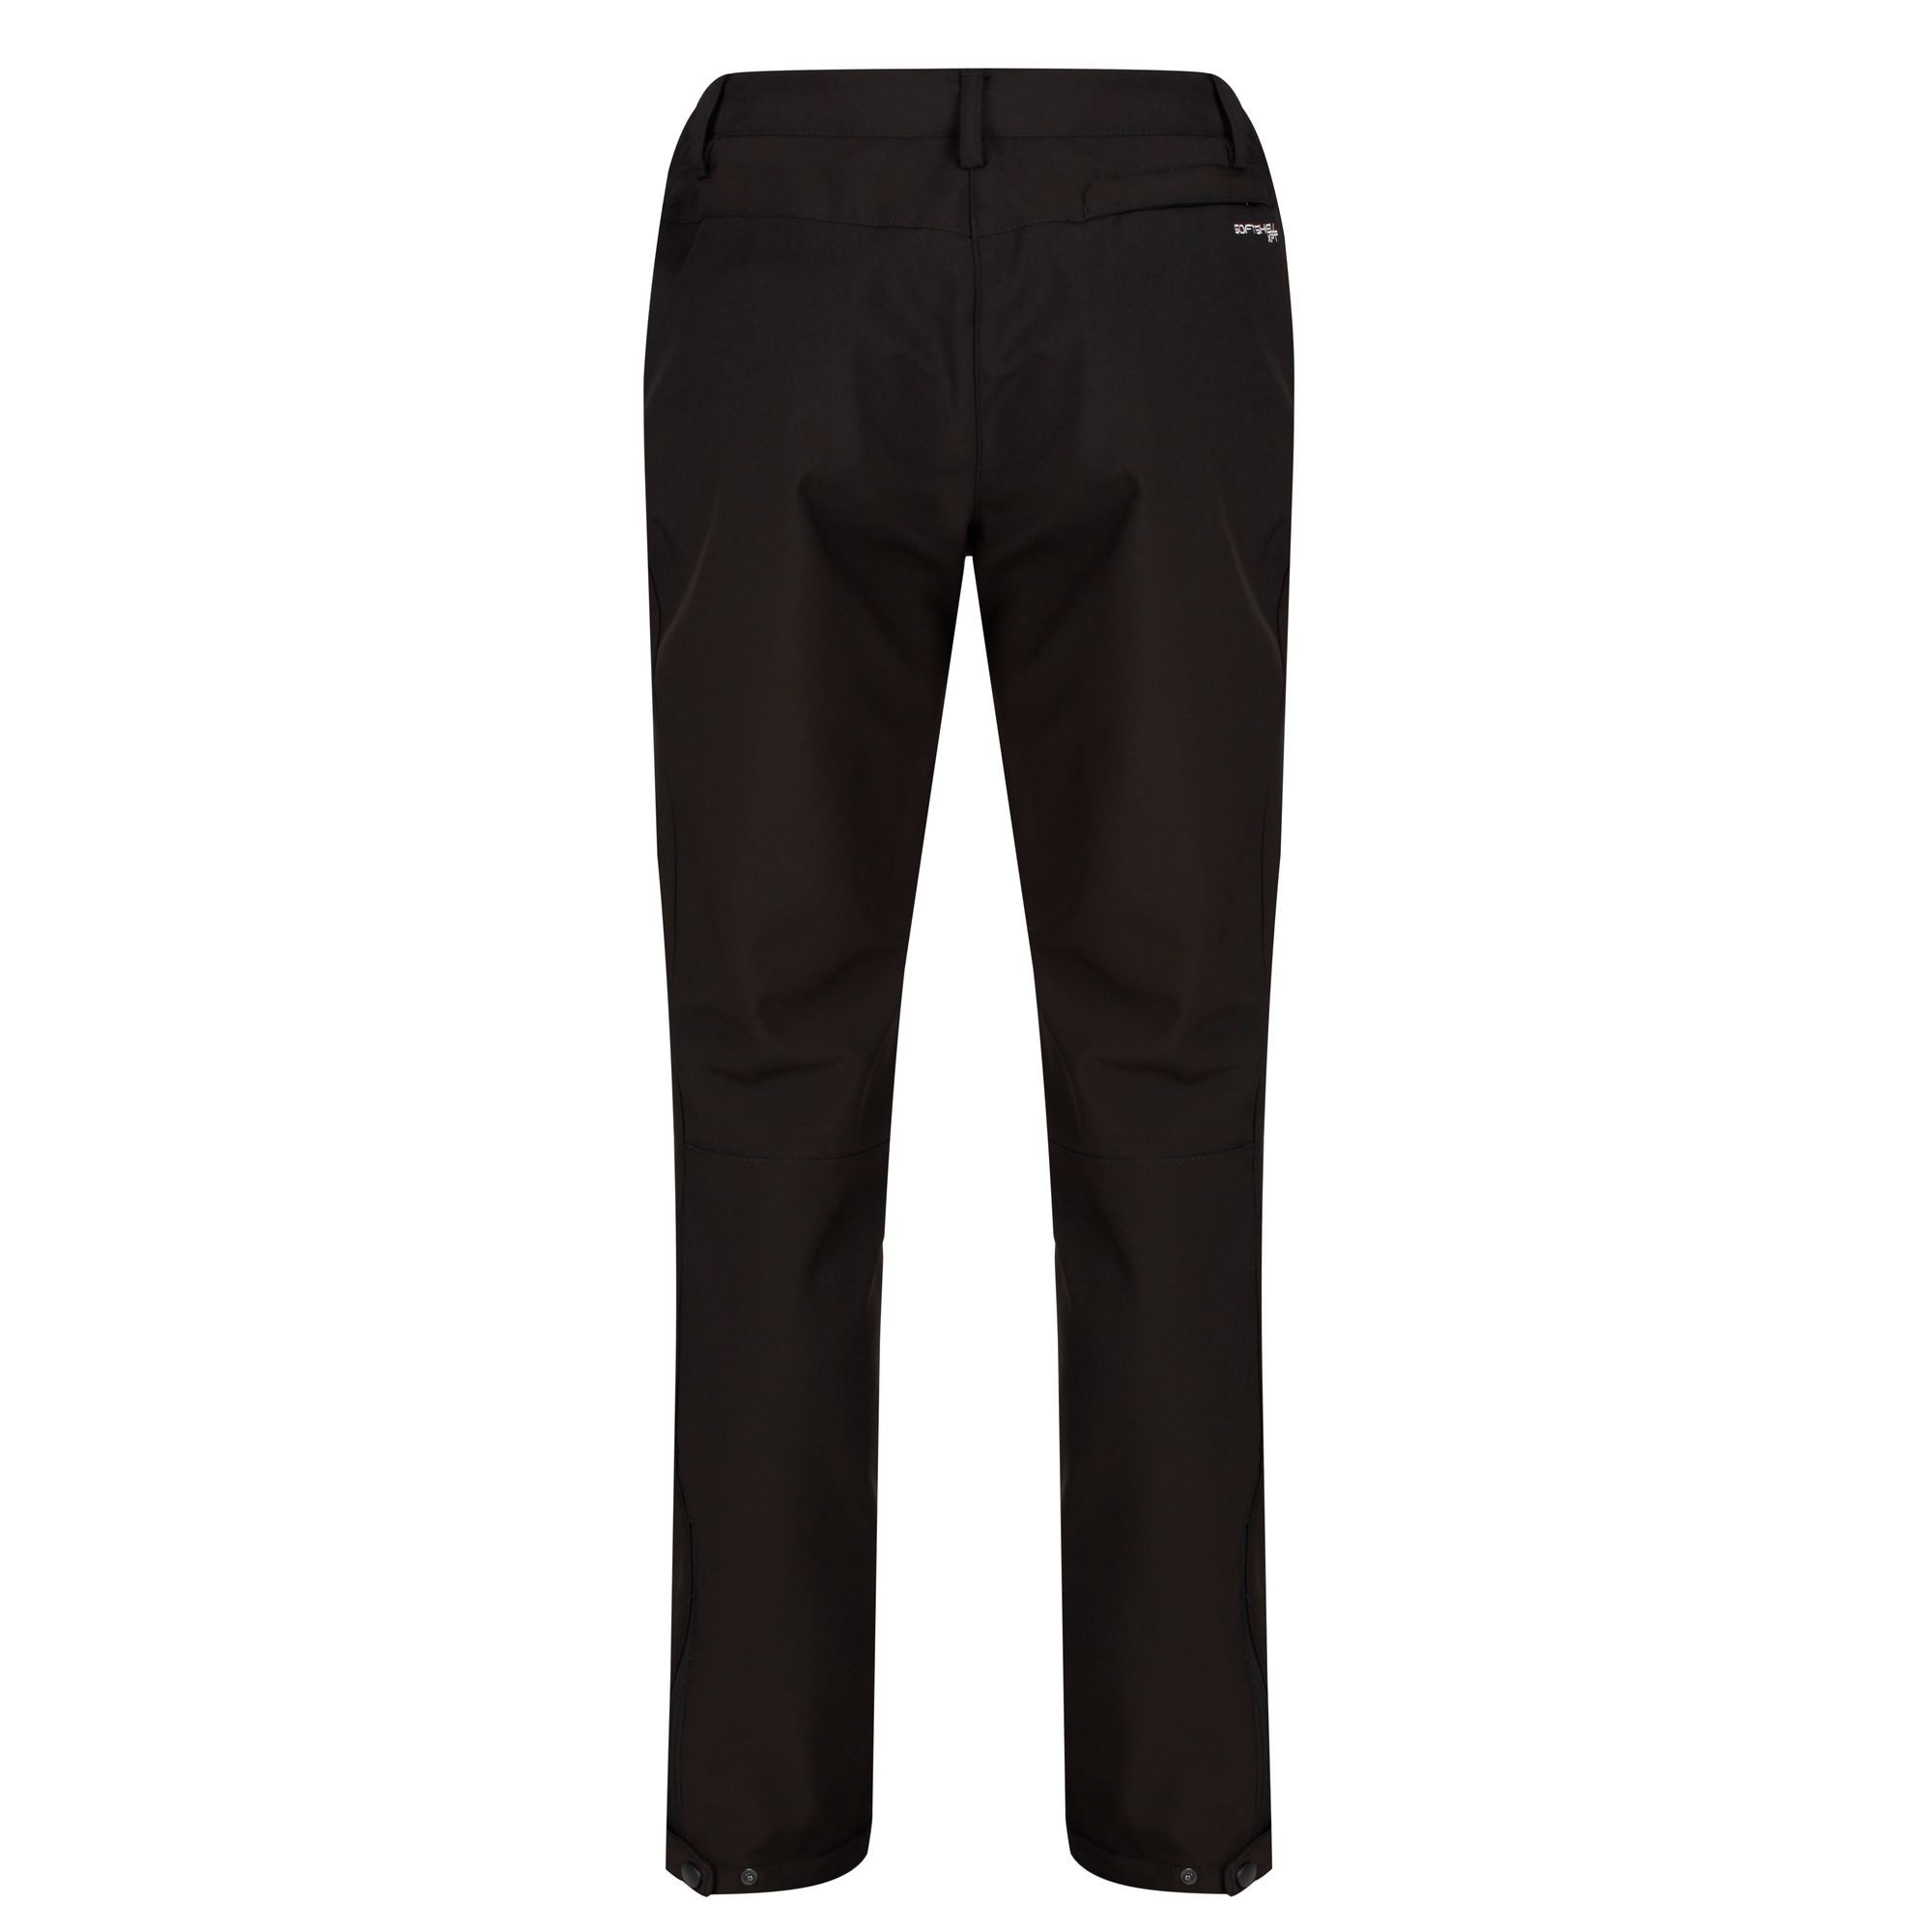 The womens Geo Softshell XPT II Trousers use a breathable, wind resistant membrane with a DWR (Durable Water Repellent) finish for maximum comfort on demanding days. They stave off showers and gales and keep you warm while allowing superb mobility. Packed with handy pockets and part elastic at the waist for comfort as you move, they have proven to be a best-selling performance trousers year-on-year. Leg length - 33ins. Regatta Womens sizing (waist approx): 6 (23in/58cm), 8 (25in/63cm), 10 (27in/68cm), 12 (29in/74cm), 14 (31in/79cm), 16 (33in/84cm), 18 (36in/91cm), 20 (38in/96cm), 22 (41in/104cm), 24 (43in/109cm), 26 (45in/114cm), 28 (47in/119cm), 30 (49in/124cm), 32 (51in/129cm), 34 (53in/135cm), 36 (55in/140cm). 15% Elastane, 85% Polyamide.